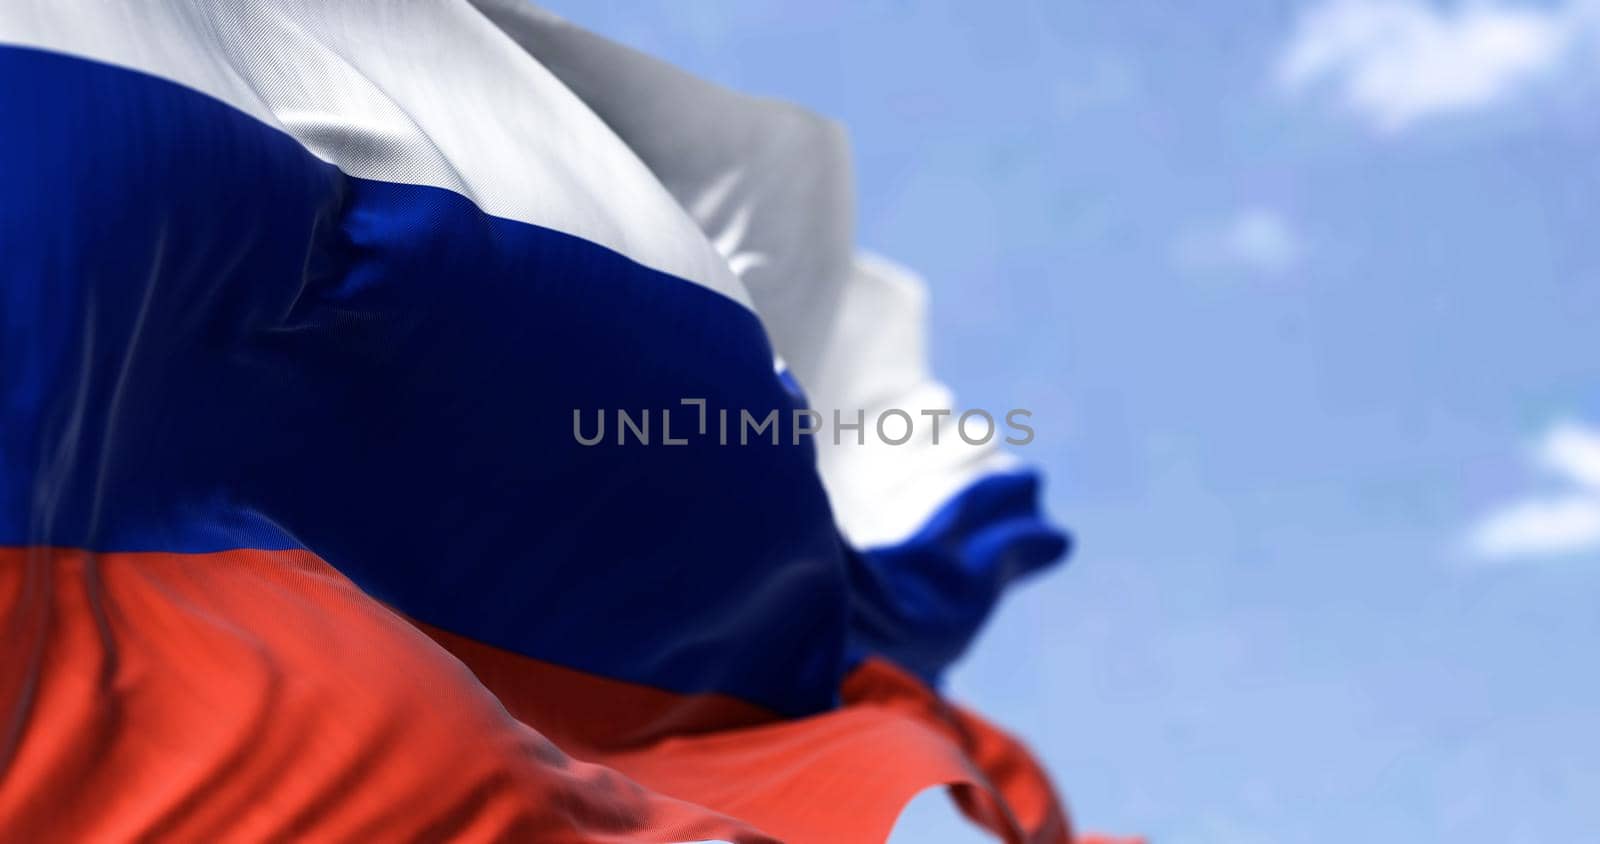 Detail of the national flag of Russia waving in the wind by rarrarorro